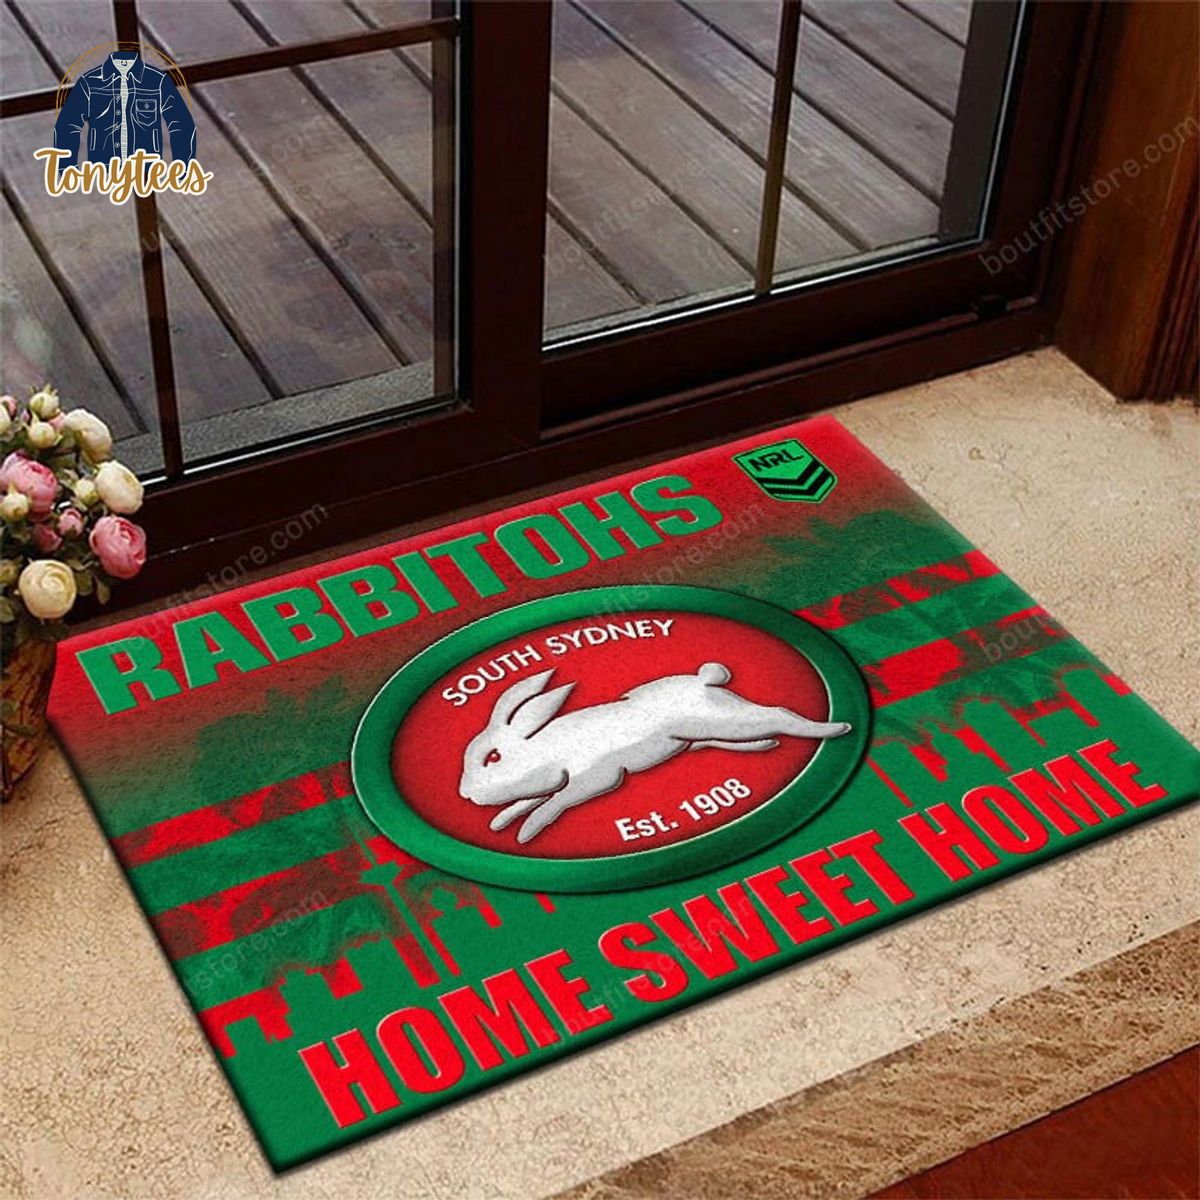 South Sydney Rabbitohs Home Sweet Home Doormat